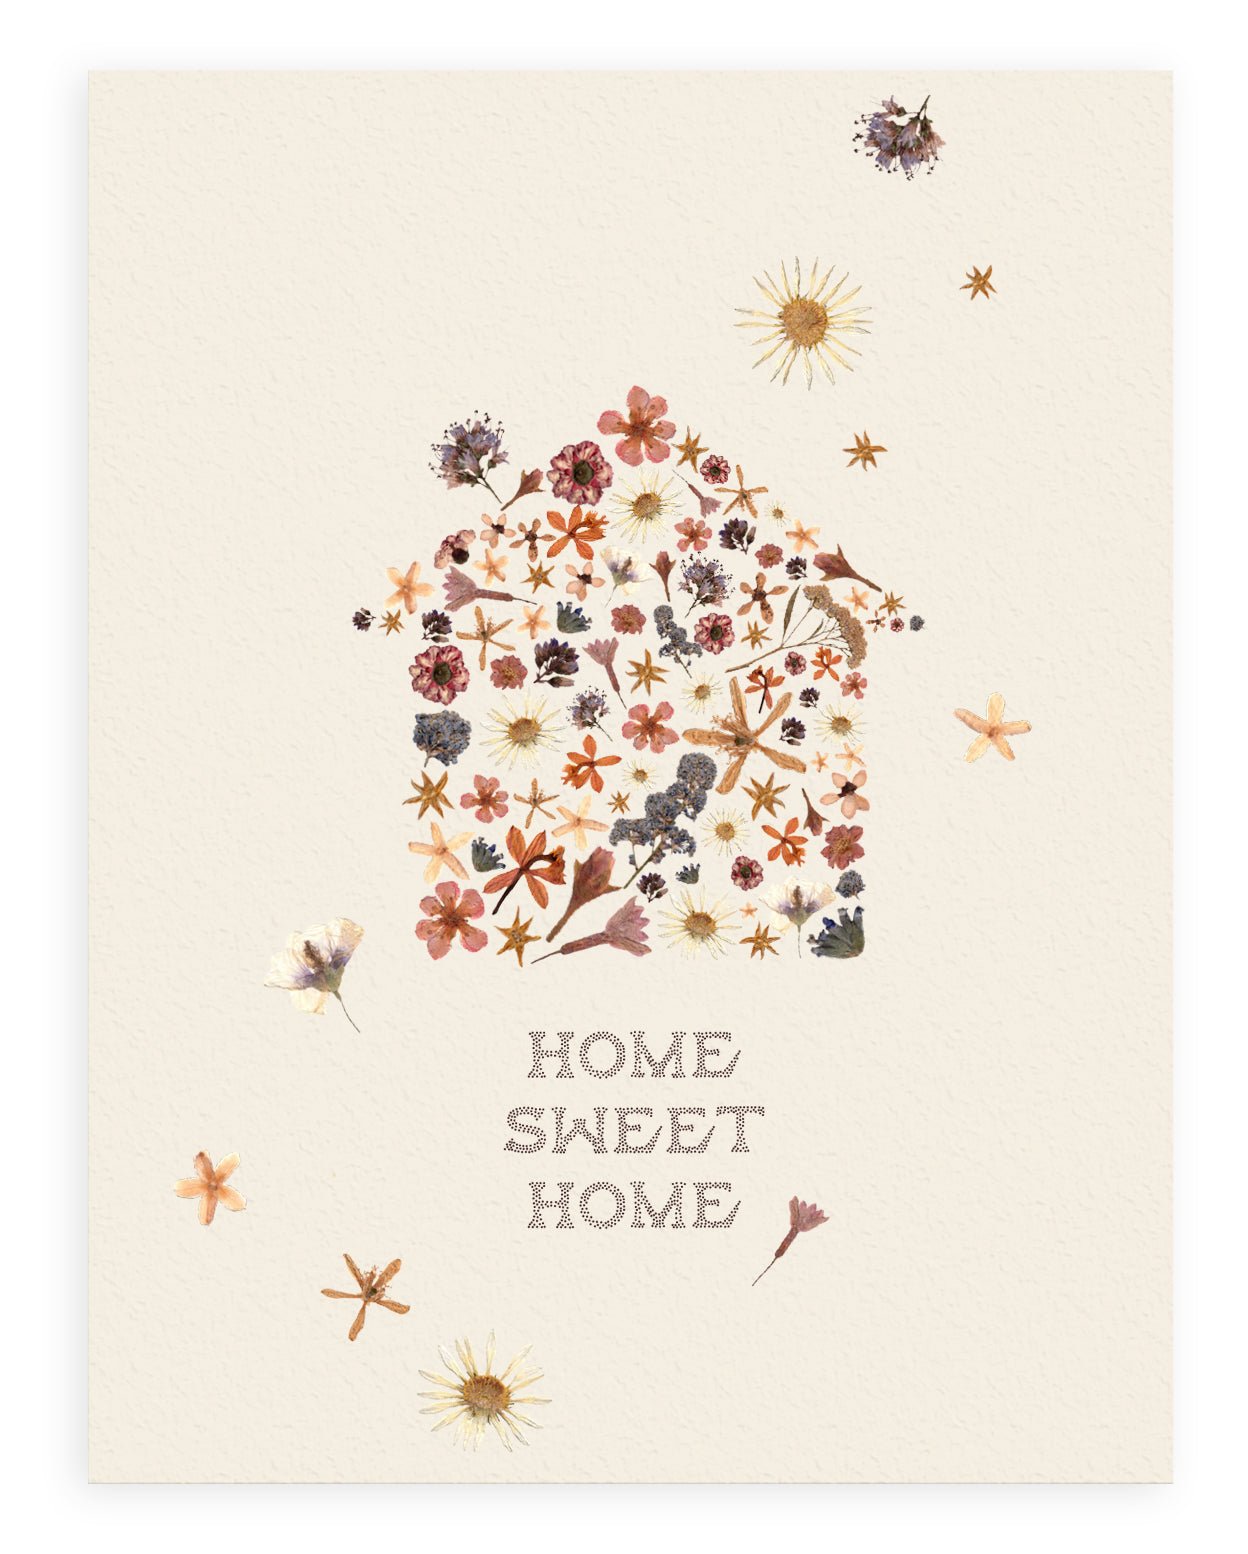 Cream colored background with pressed flowers scattered across dried flora constructed in the shape of a house with the words &quot;Home Sweet Home&quot; printed below. Shown with white background.